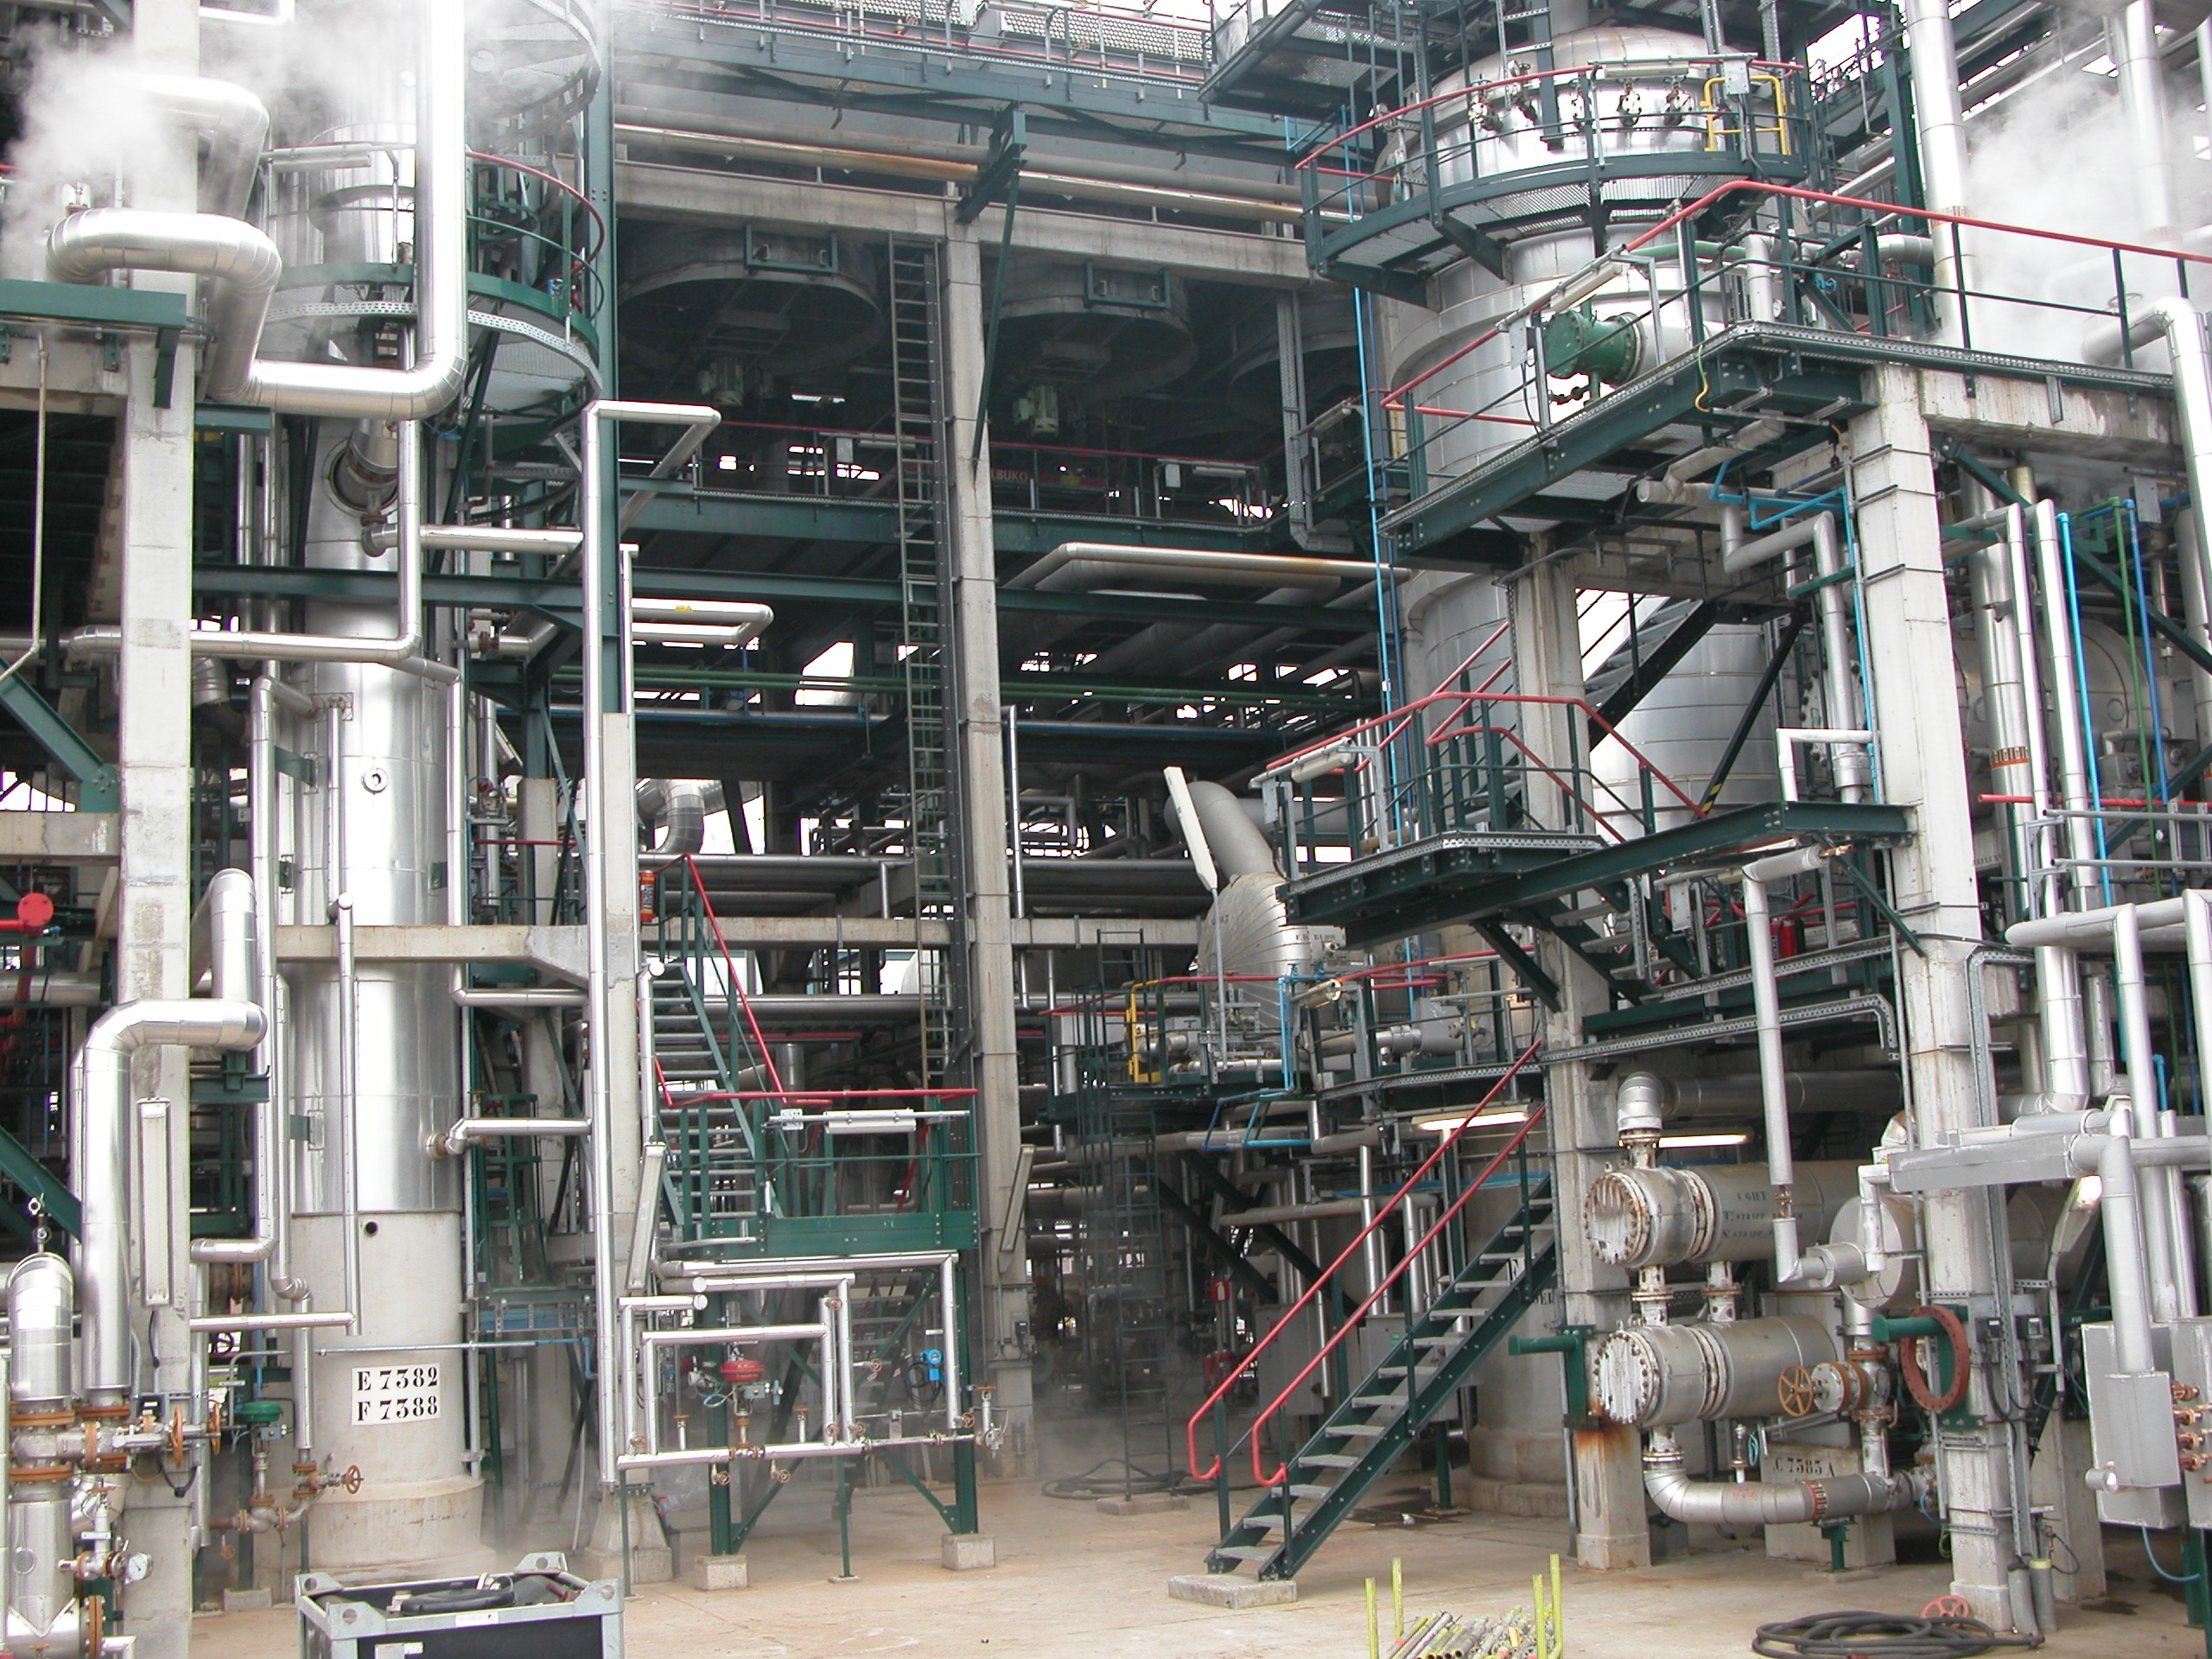 Image*After : images : factory industrial pipe pipes power ...